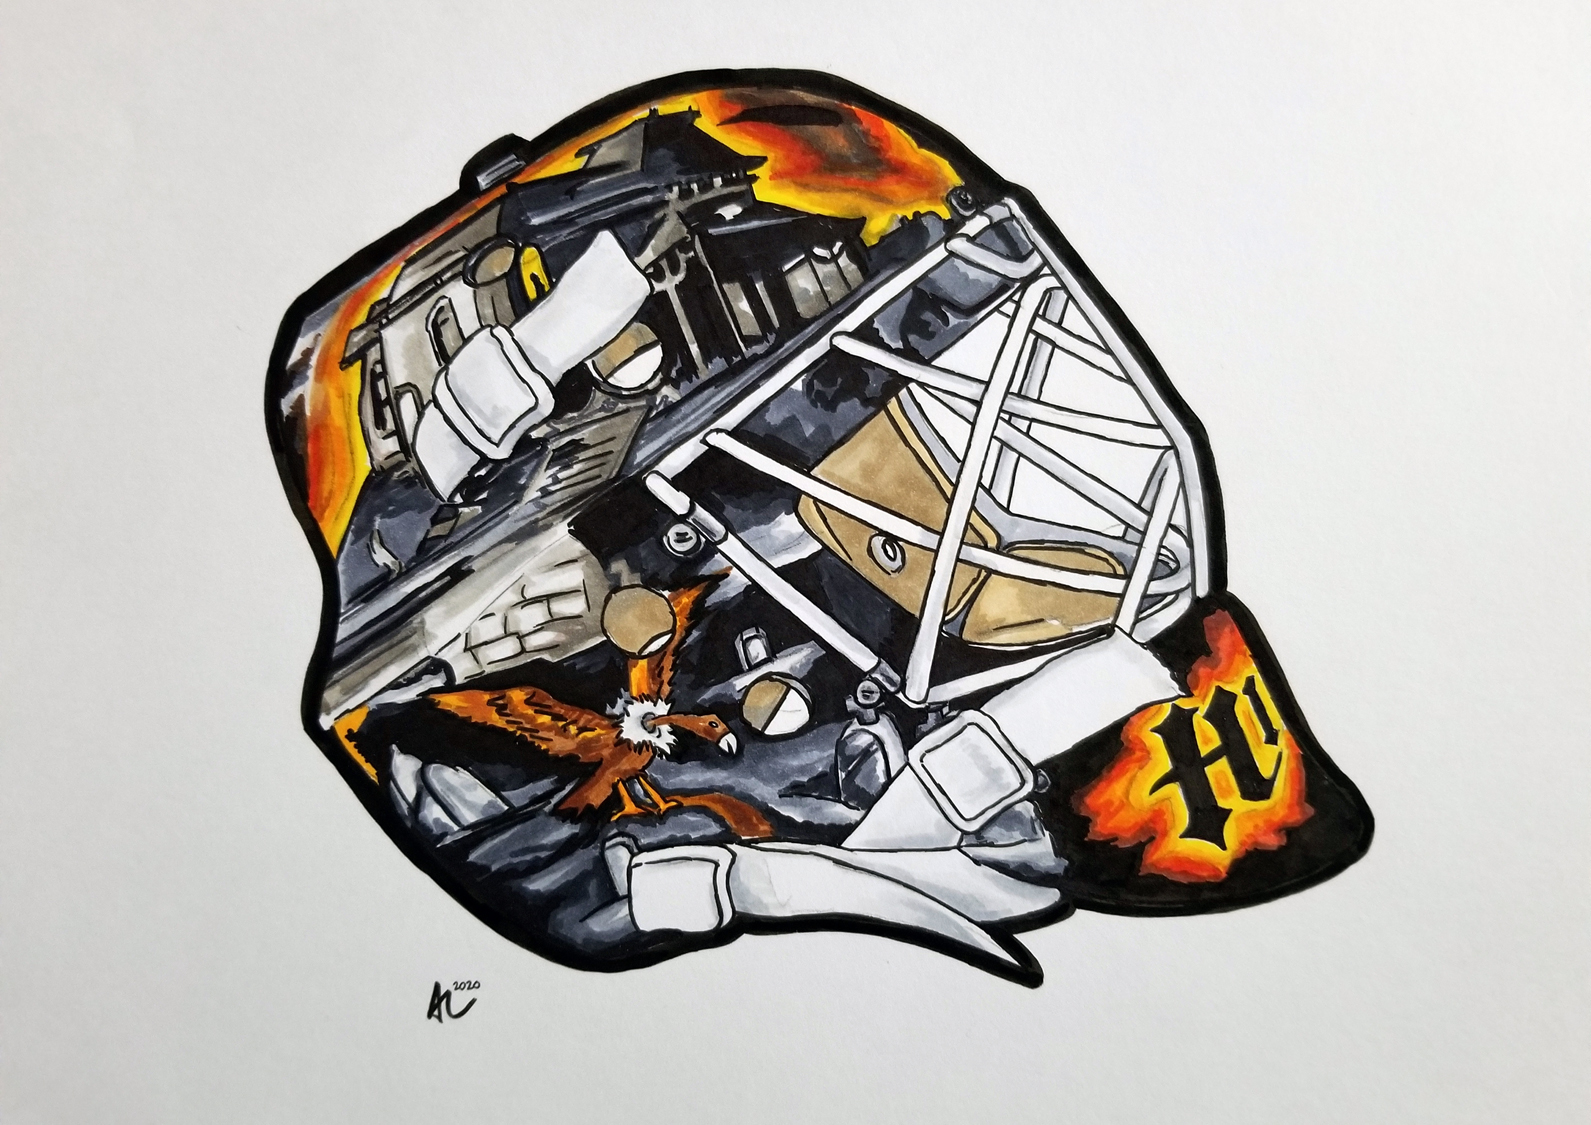 Pen and ink drawing of a goalie mask with cage and Hitchcock-inspired Halloween design.